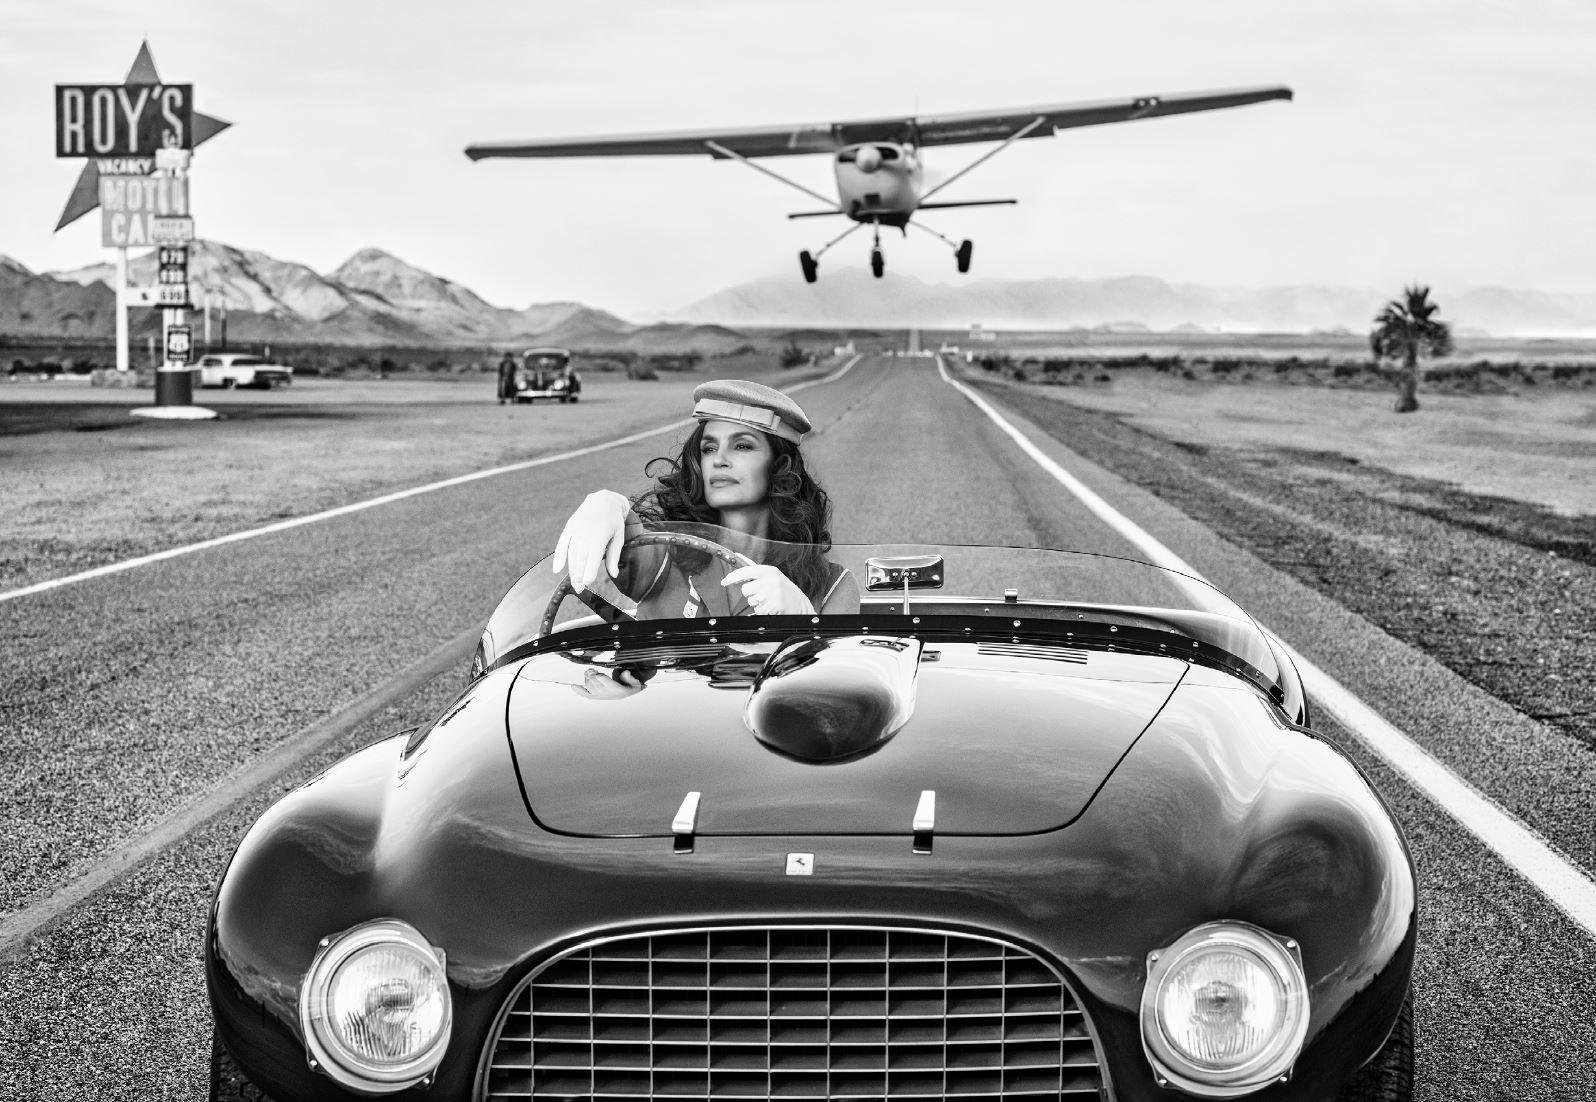 David Yarrow Black and White Photograph - South by Southwest - Supermodel Cindy Crawford in vintage Ferrari on route 66